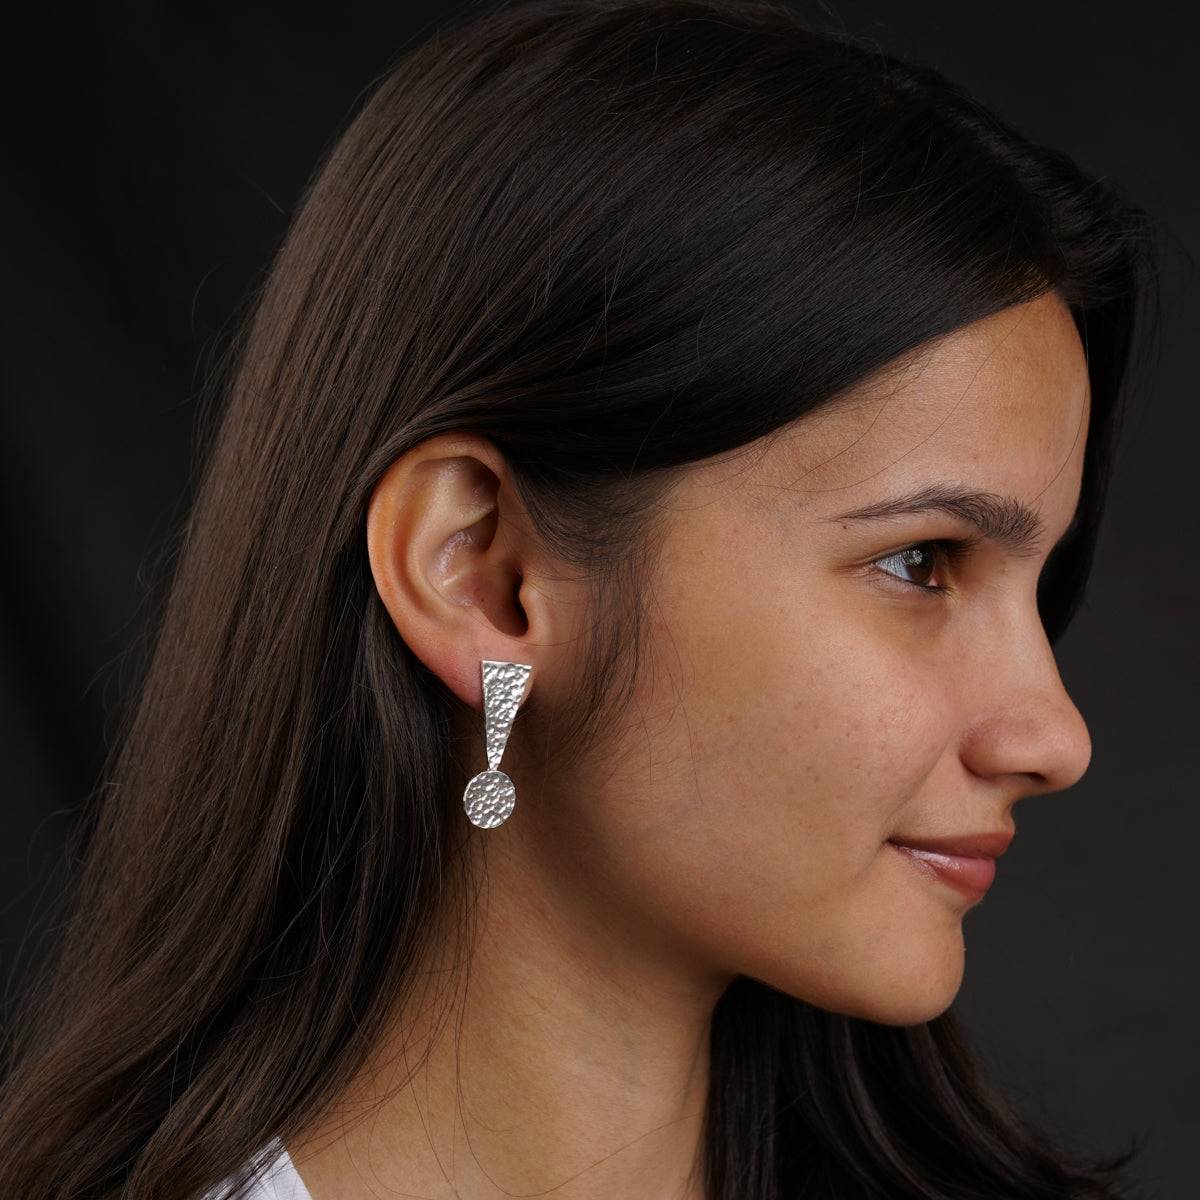 a close up of a person wearing a pair of earrings